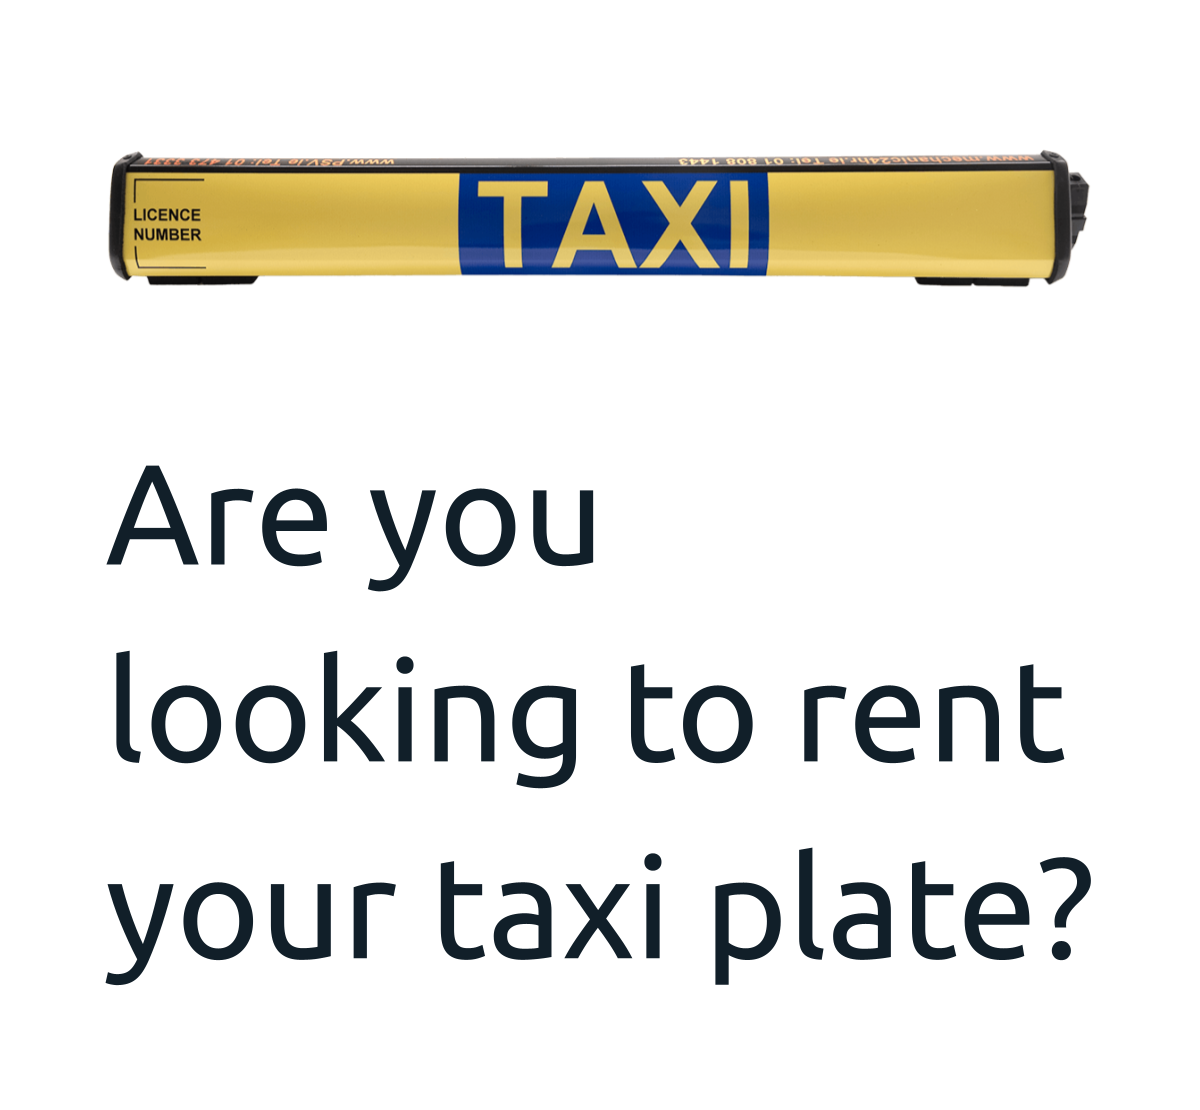 Renting a taxi plate